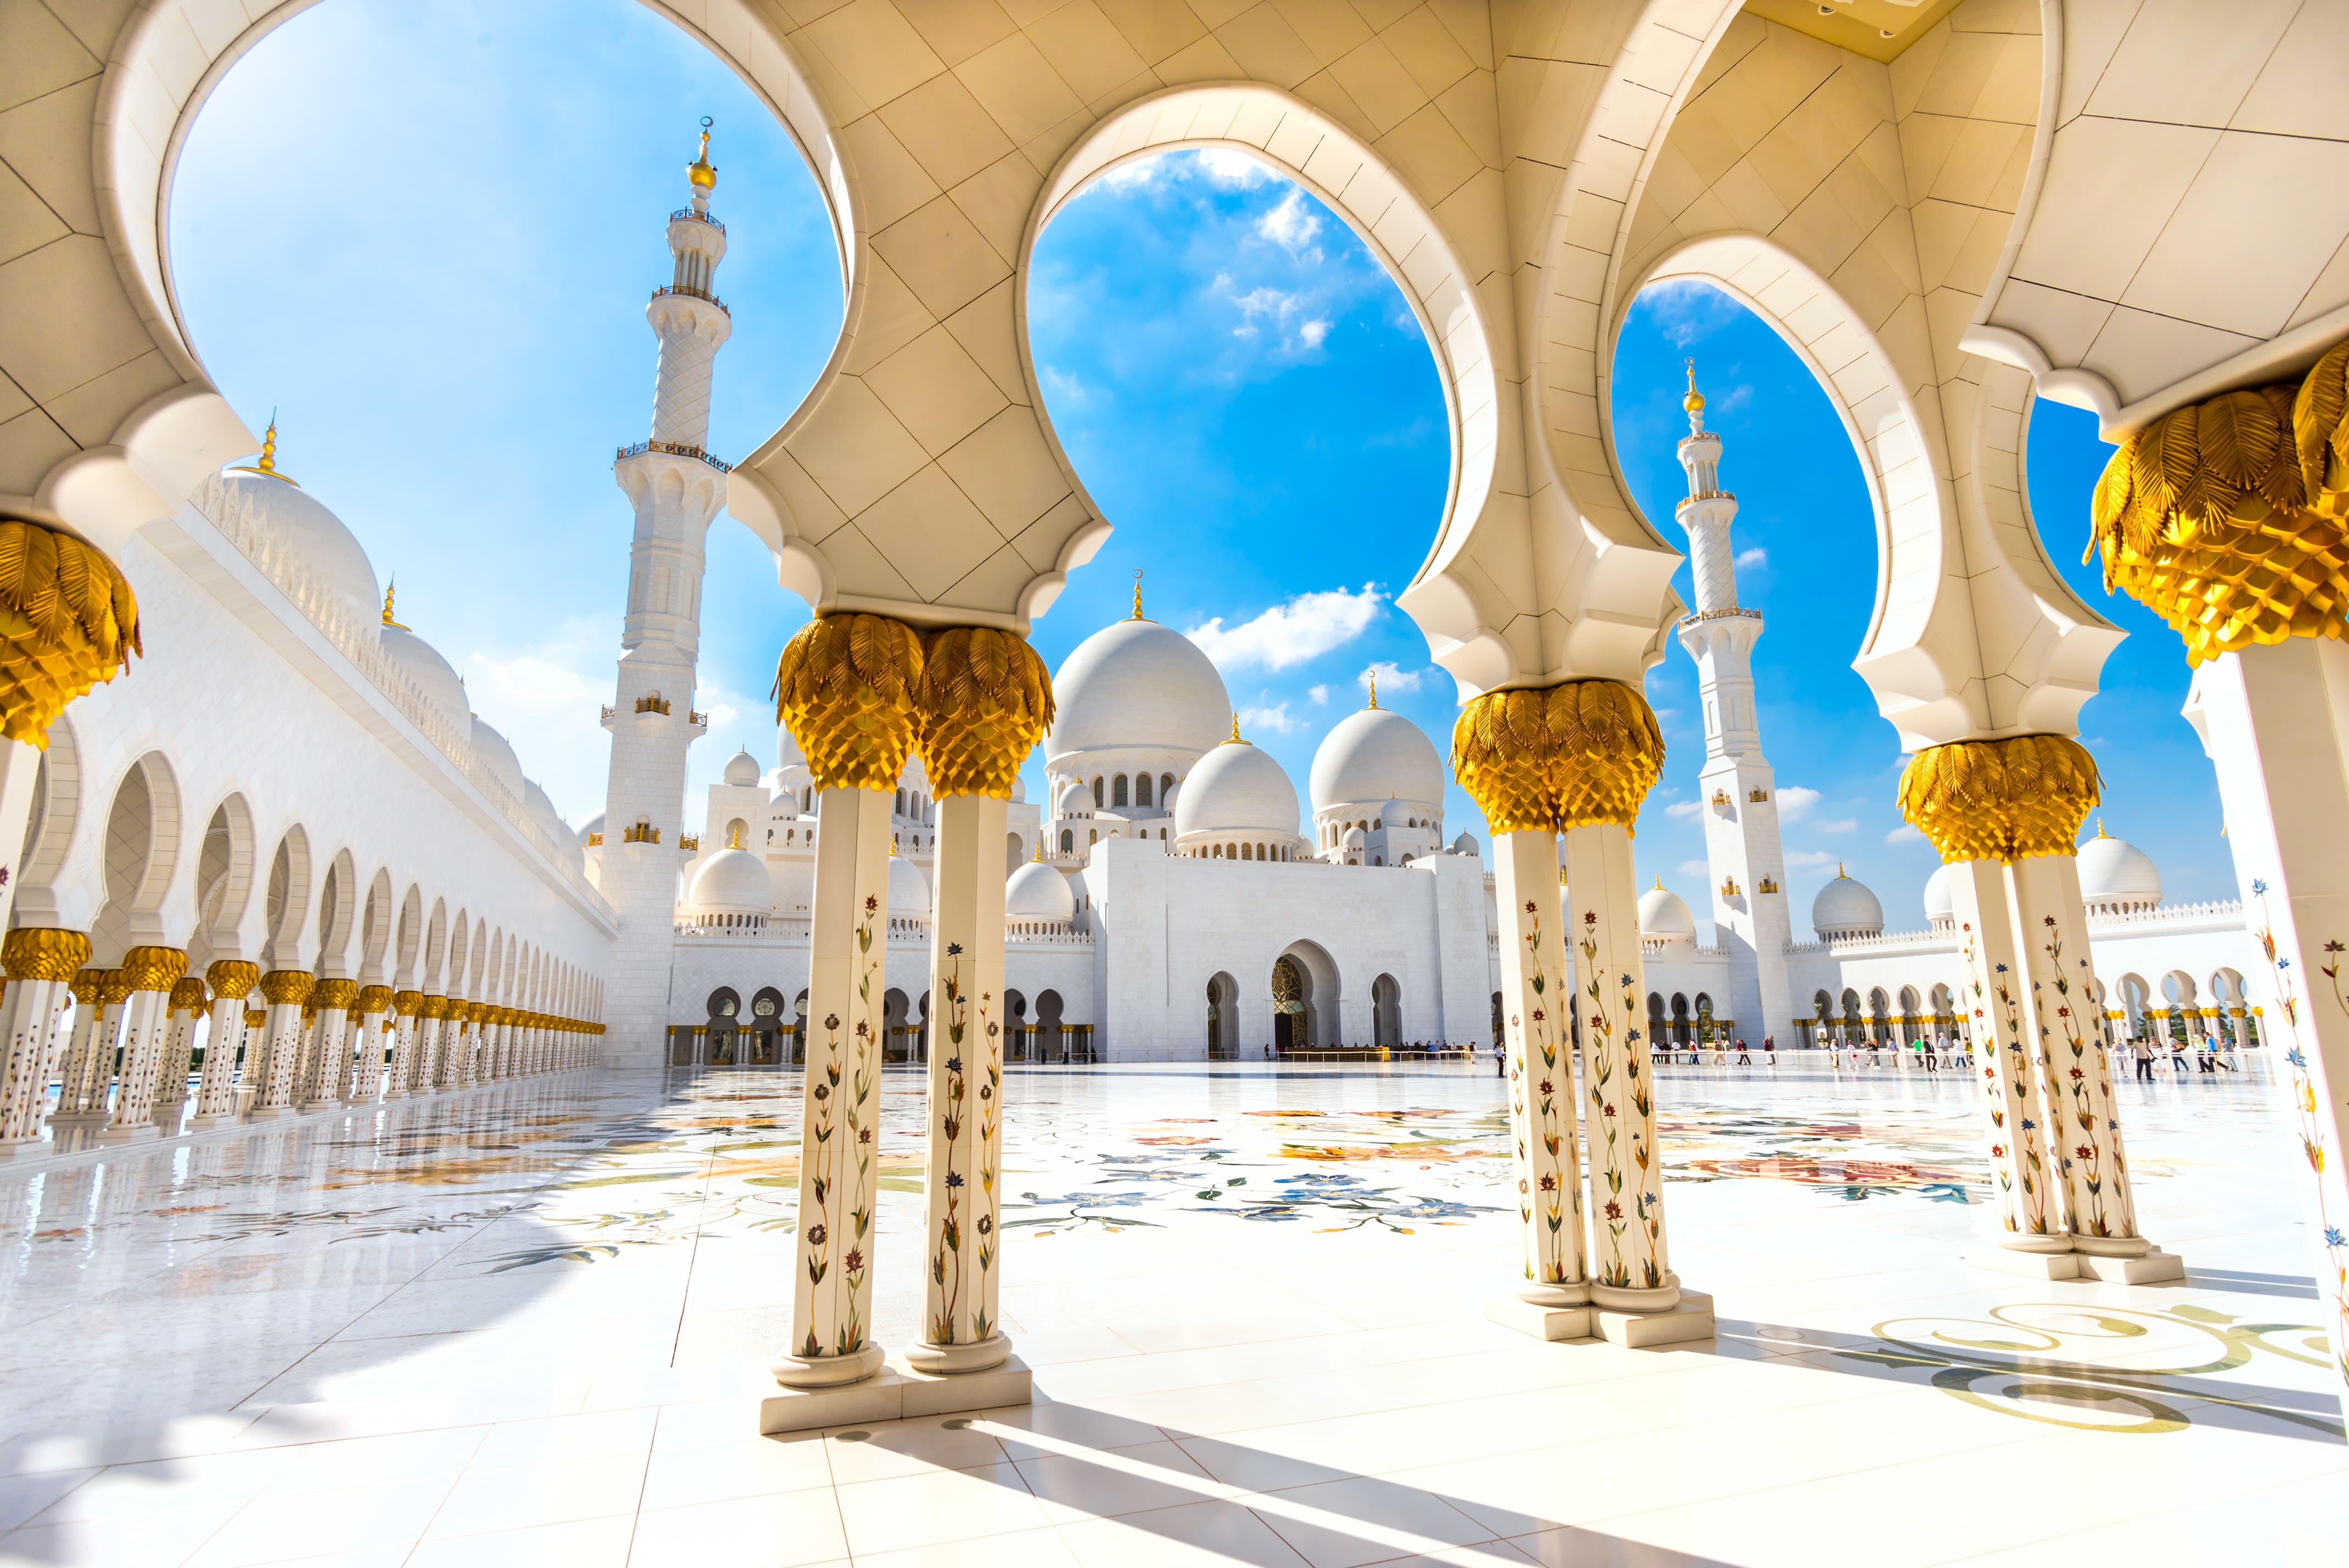 Sheikh Zayed Grand Mosque And Louvre Museum Abu Dhabi In A Day From Dubai - Travel Fube